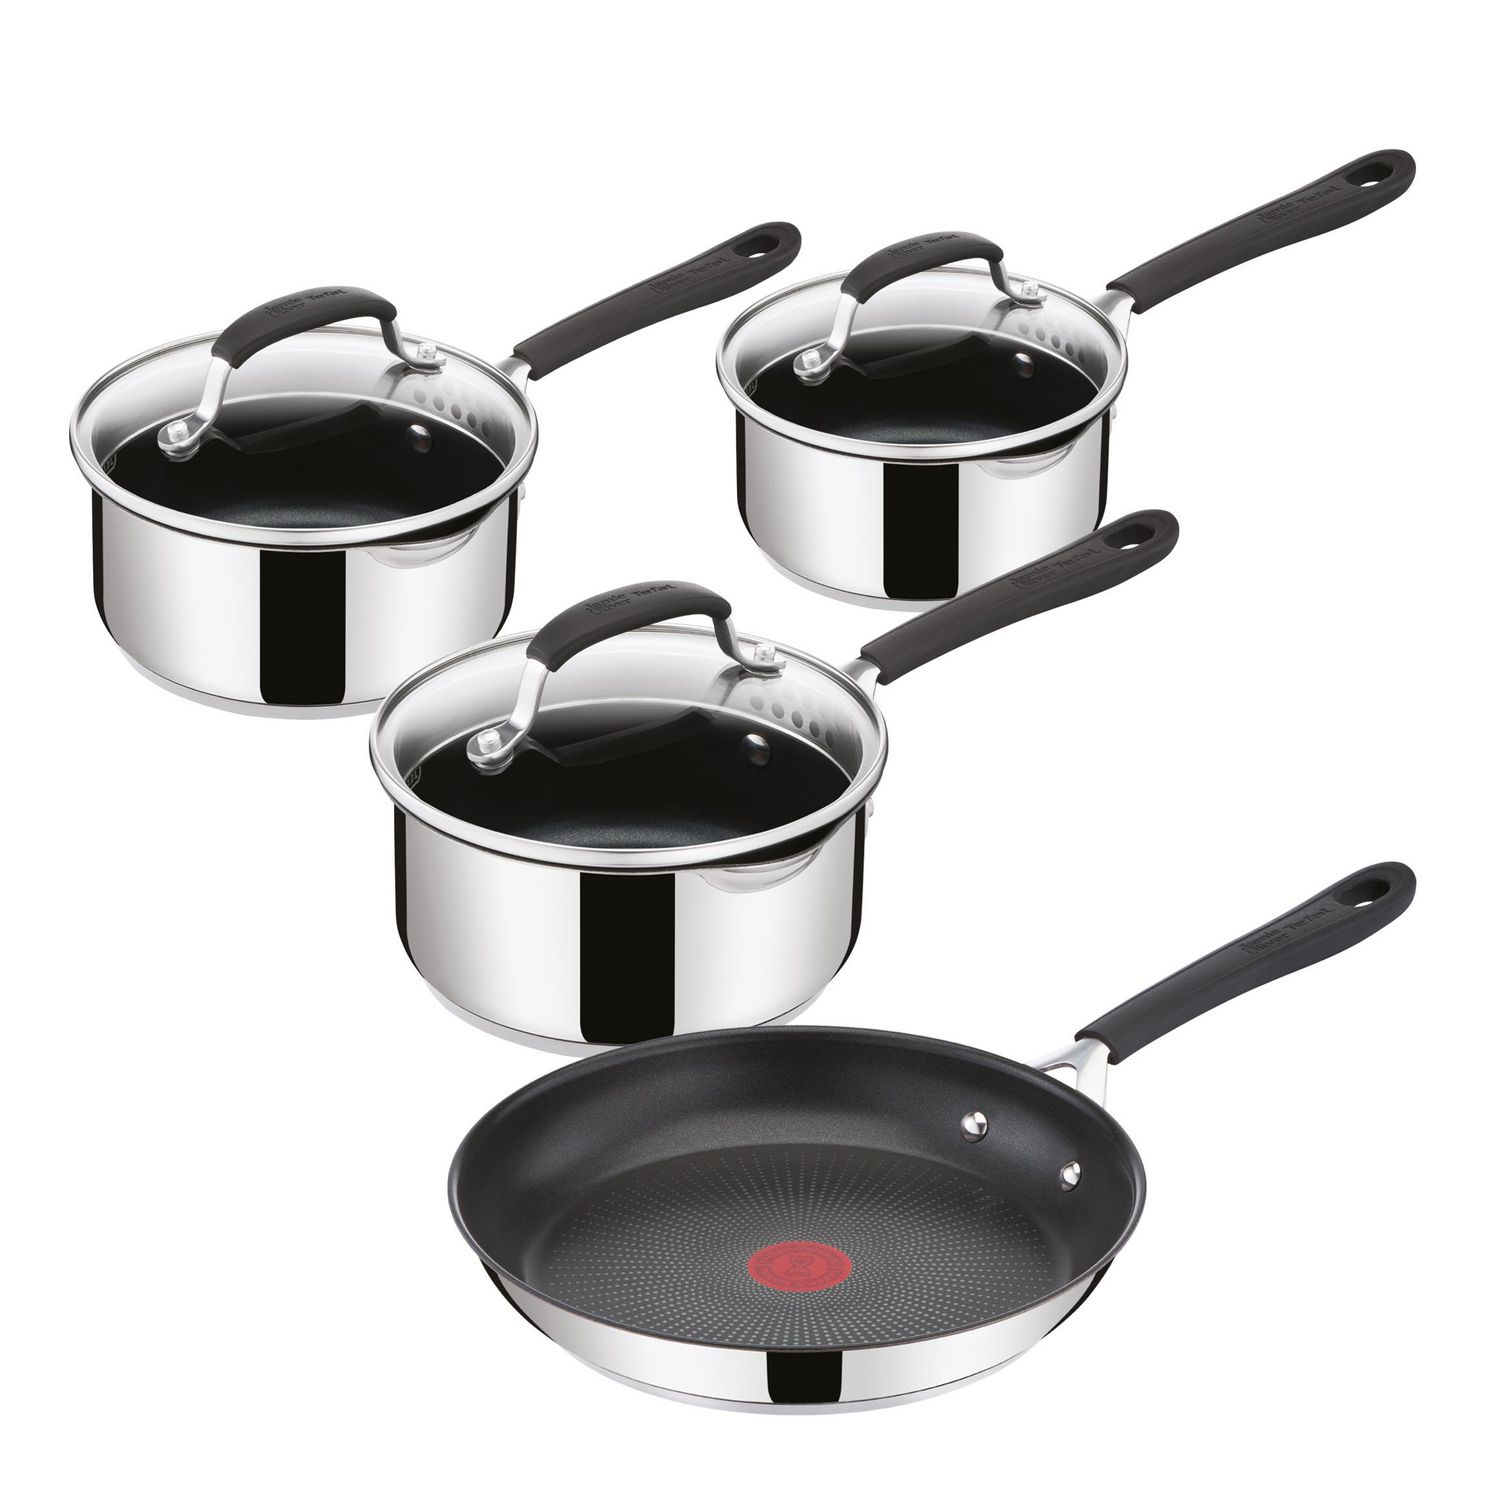 Tefal Jamie Oliver Quick & Easy Stainless Steel 7 Piece Cookware